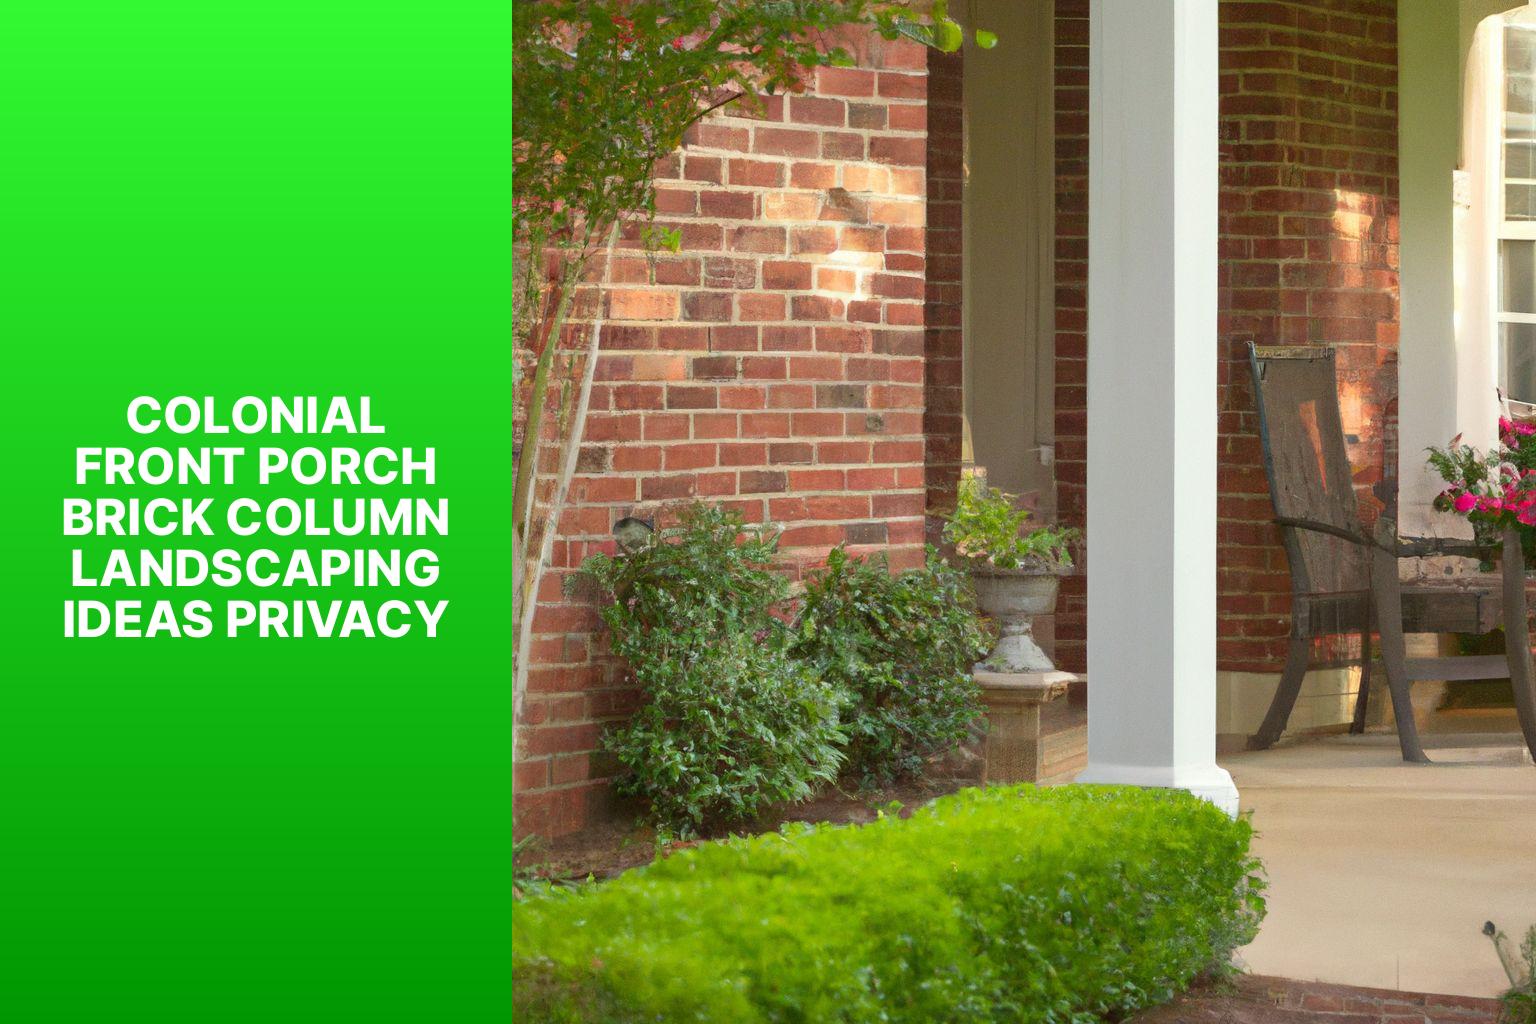 colonial front porch brick column landscaping ideas privacy